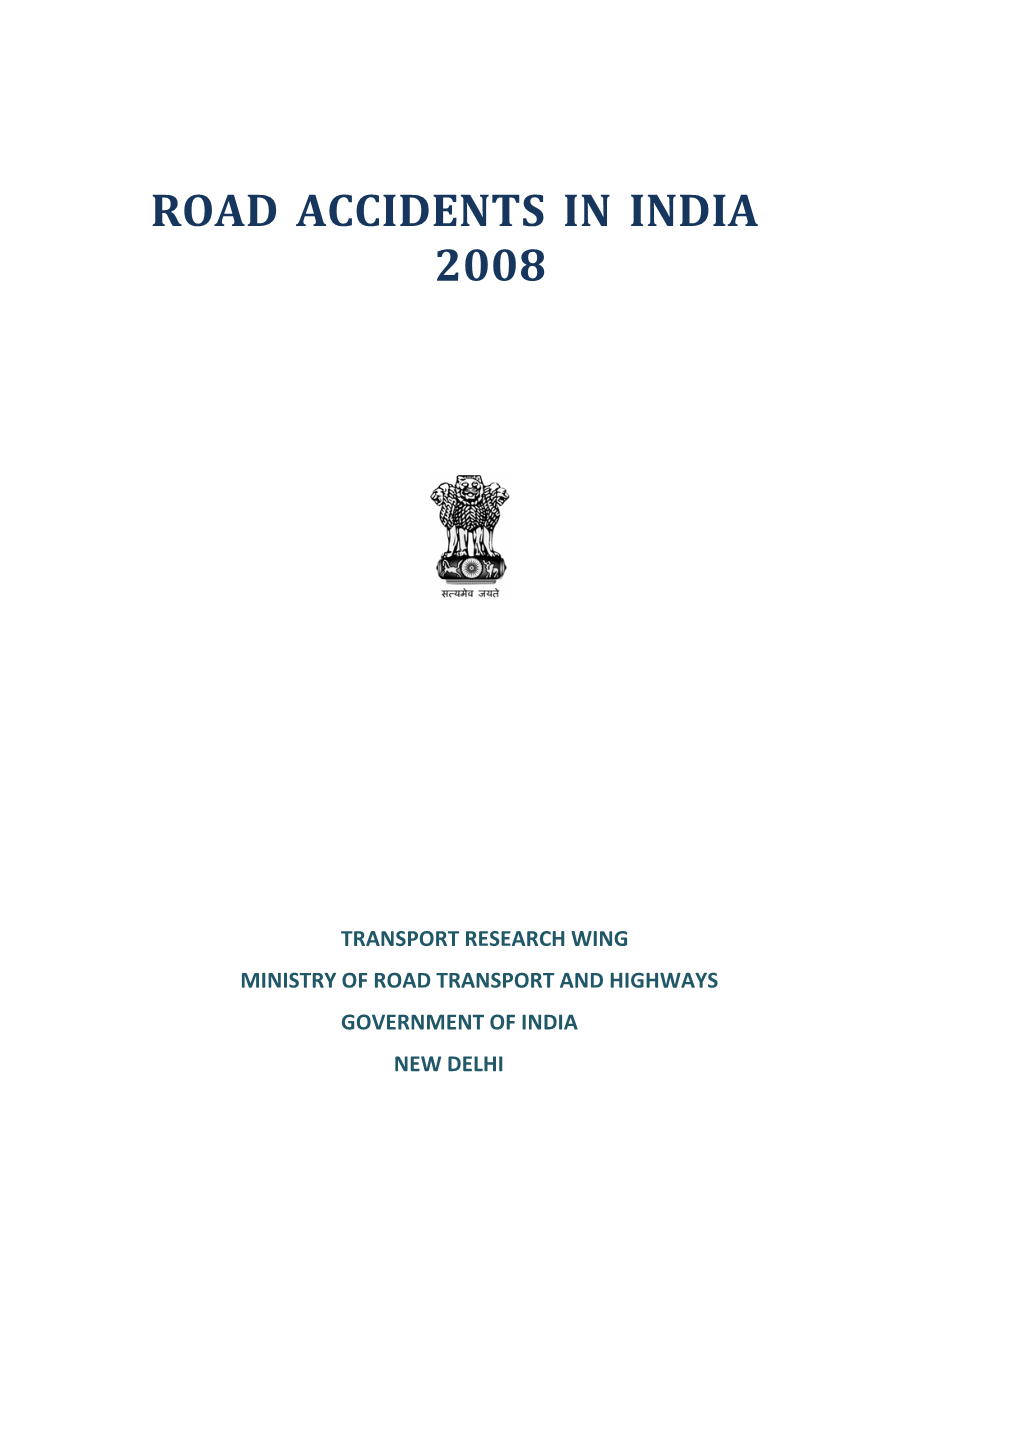 Road Accidents in India 2008